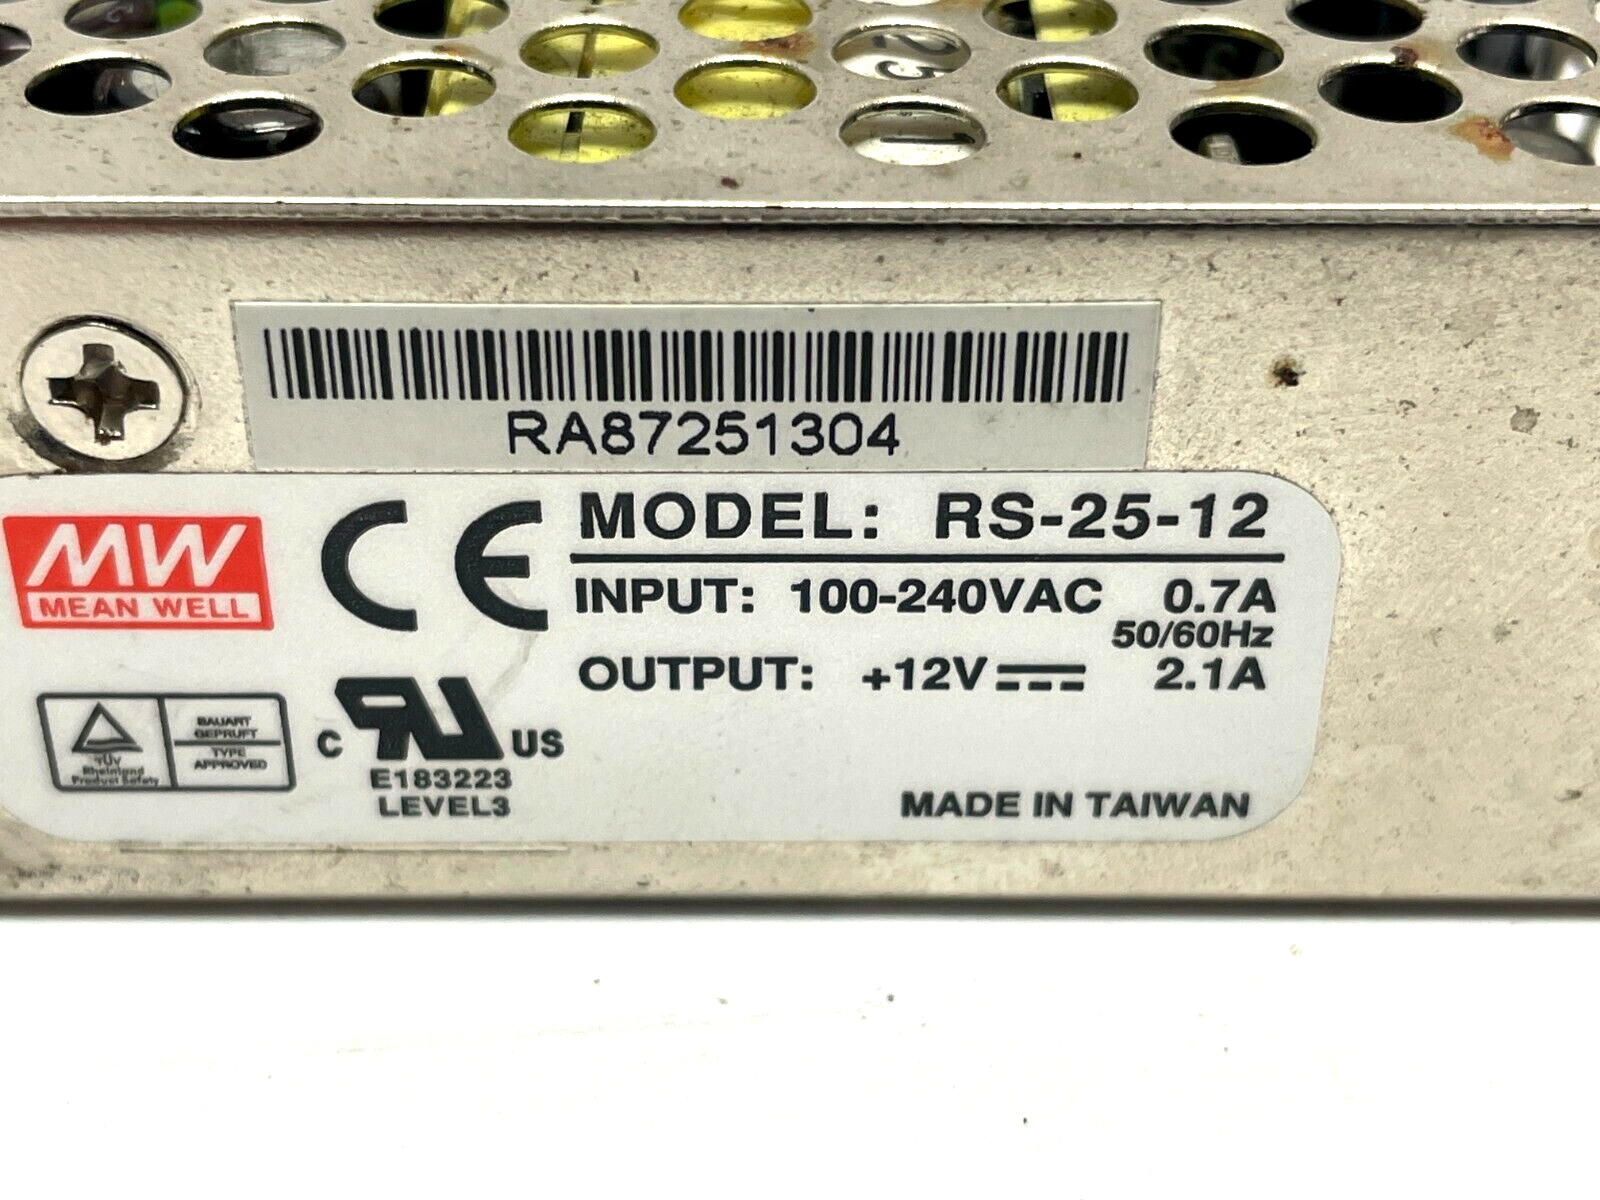 Meanwell RS-25-123 Switching Power Supply